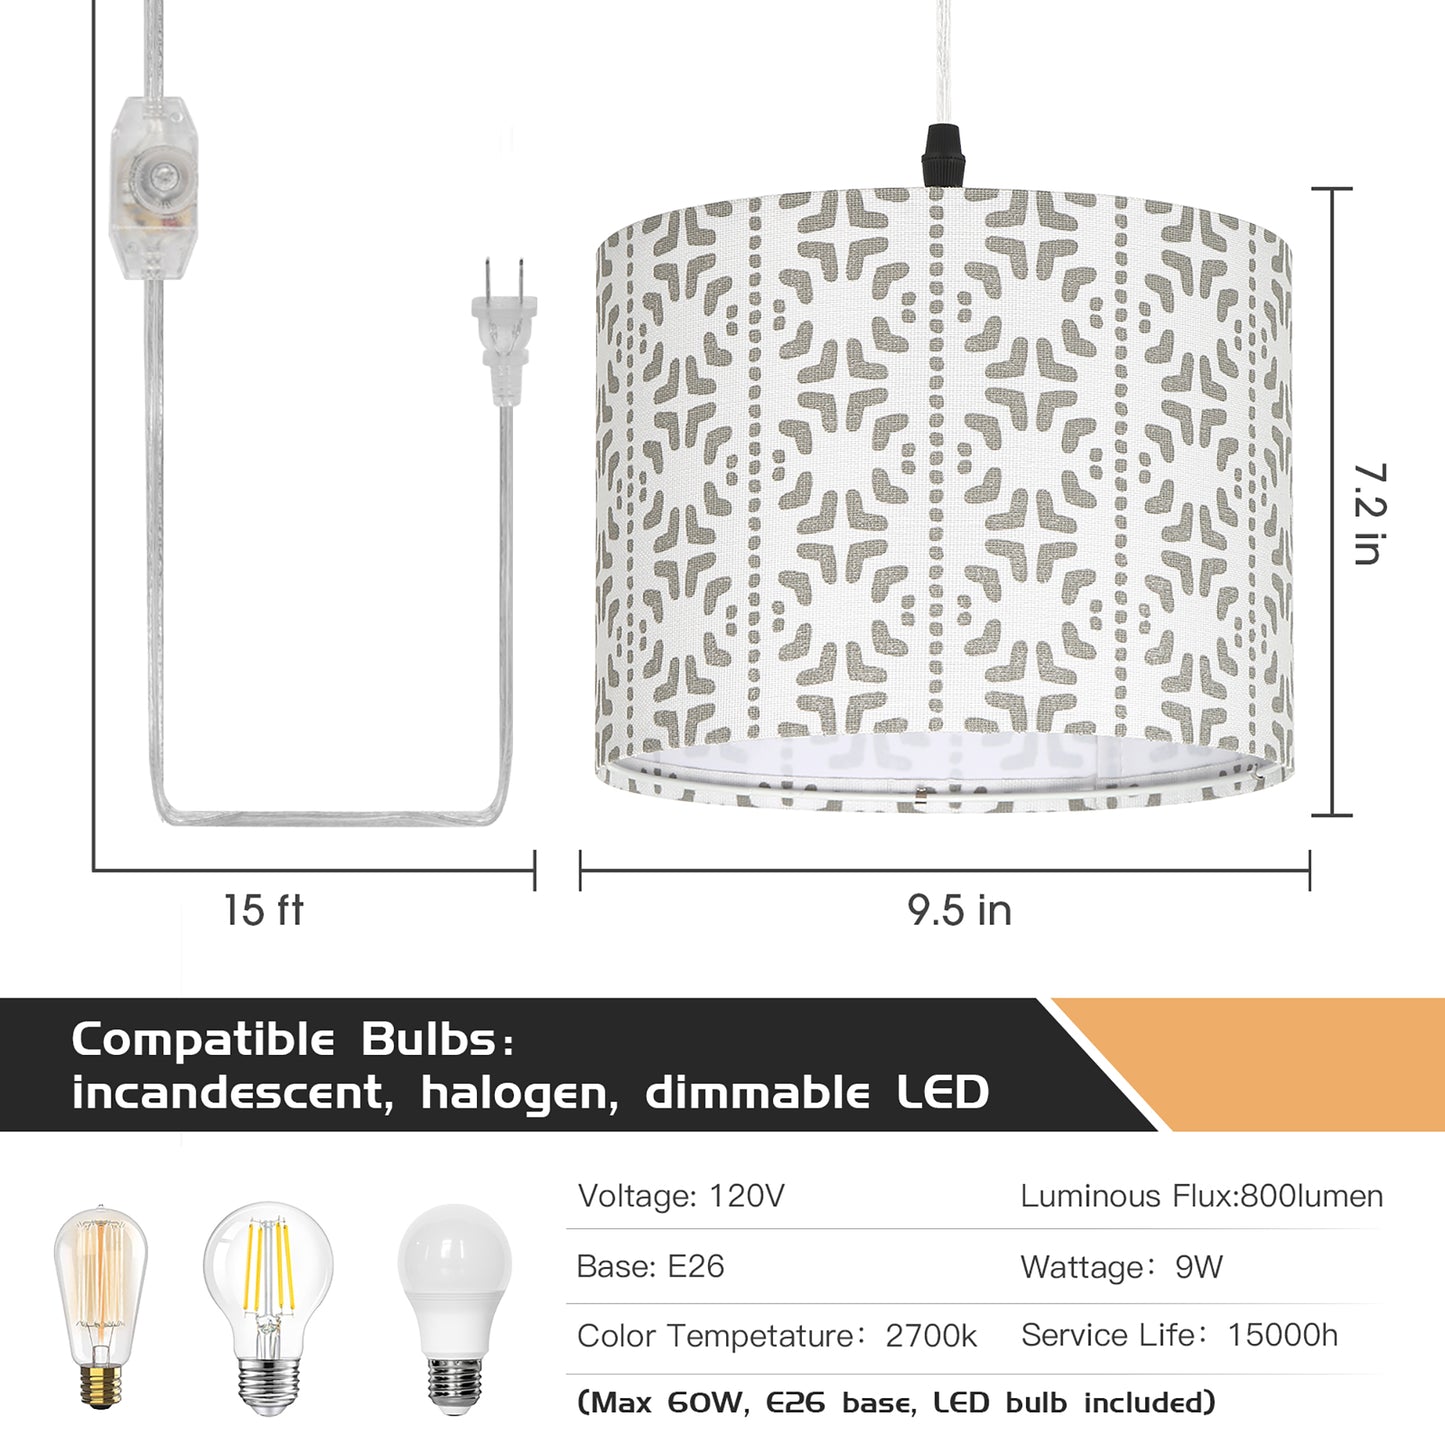 Drum-Shaped Pendant Light with Adjustable Length, Multi-Directional Illumination, and Dimming